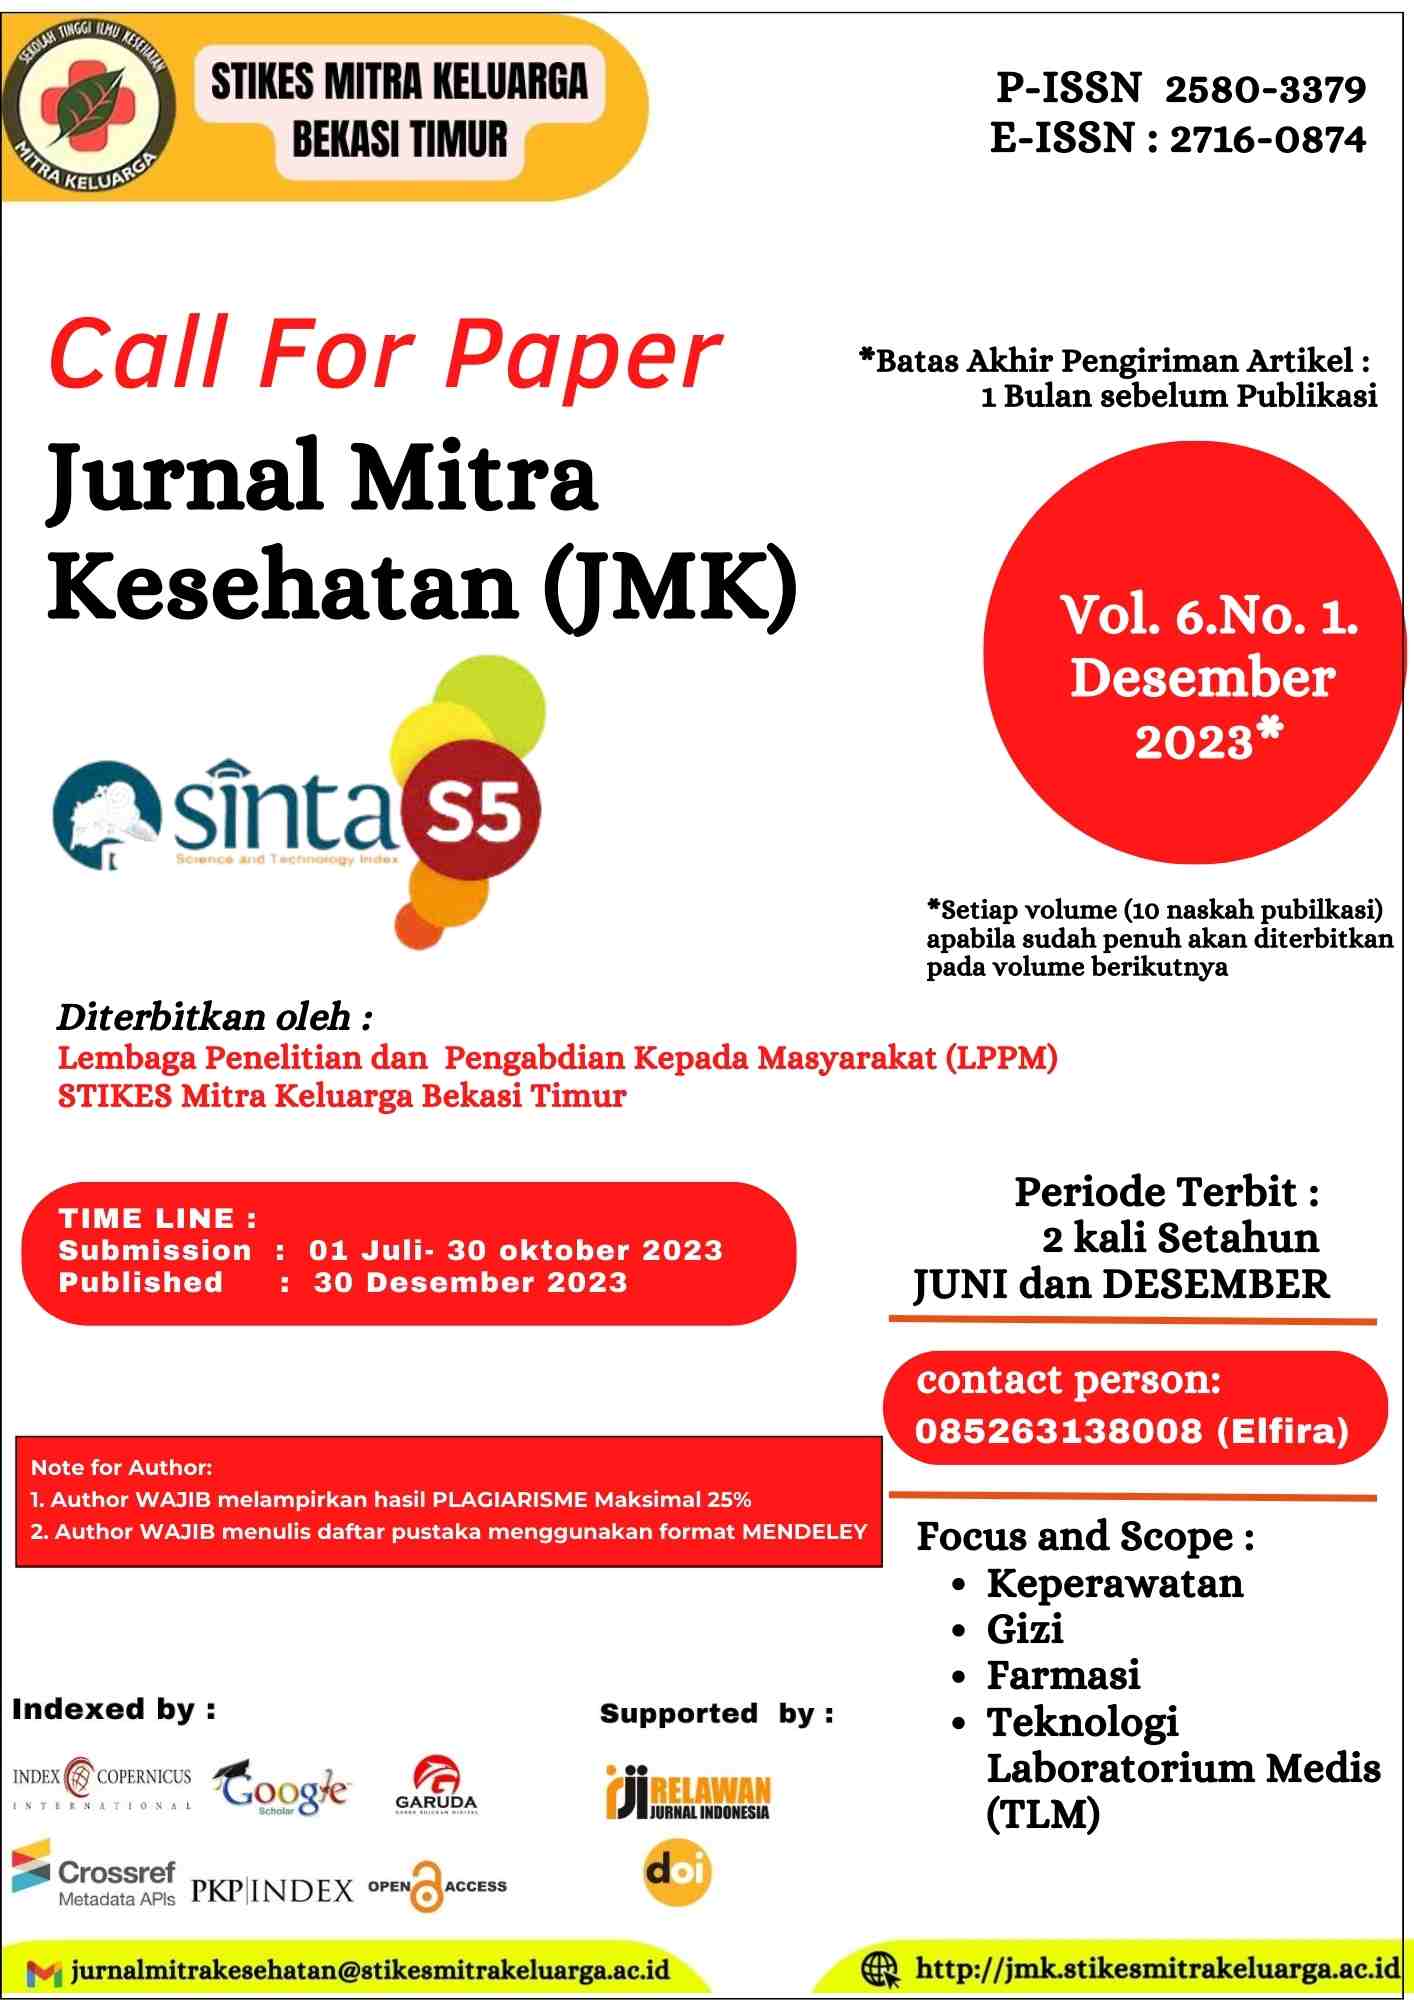 CALL FOR PAPER JMK